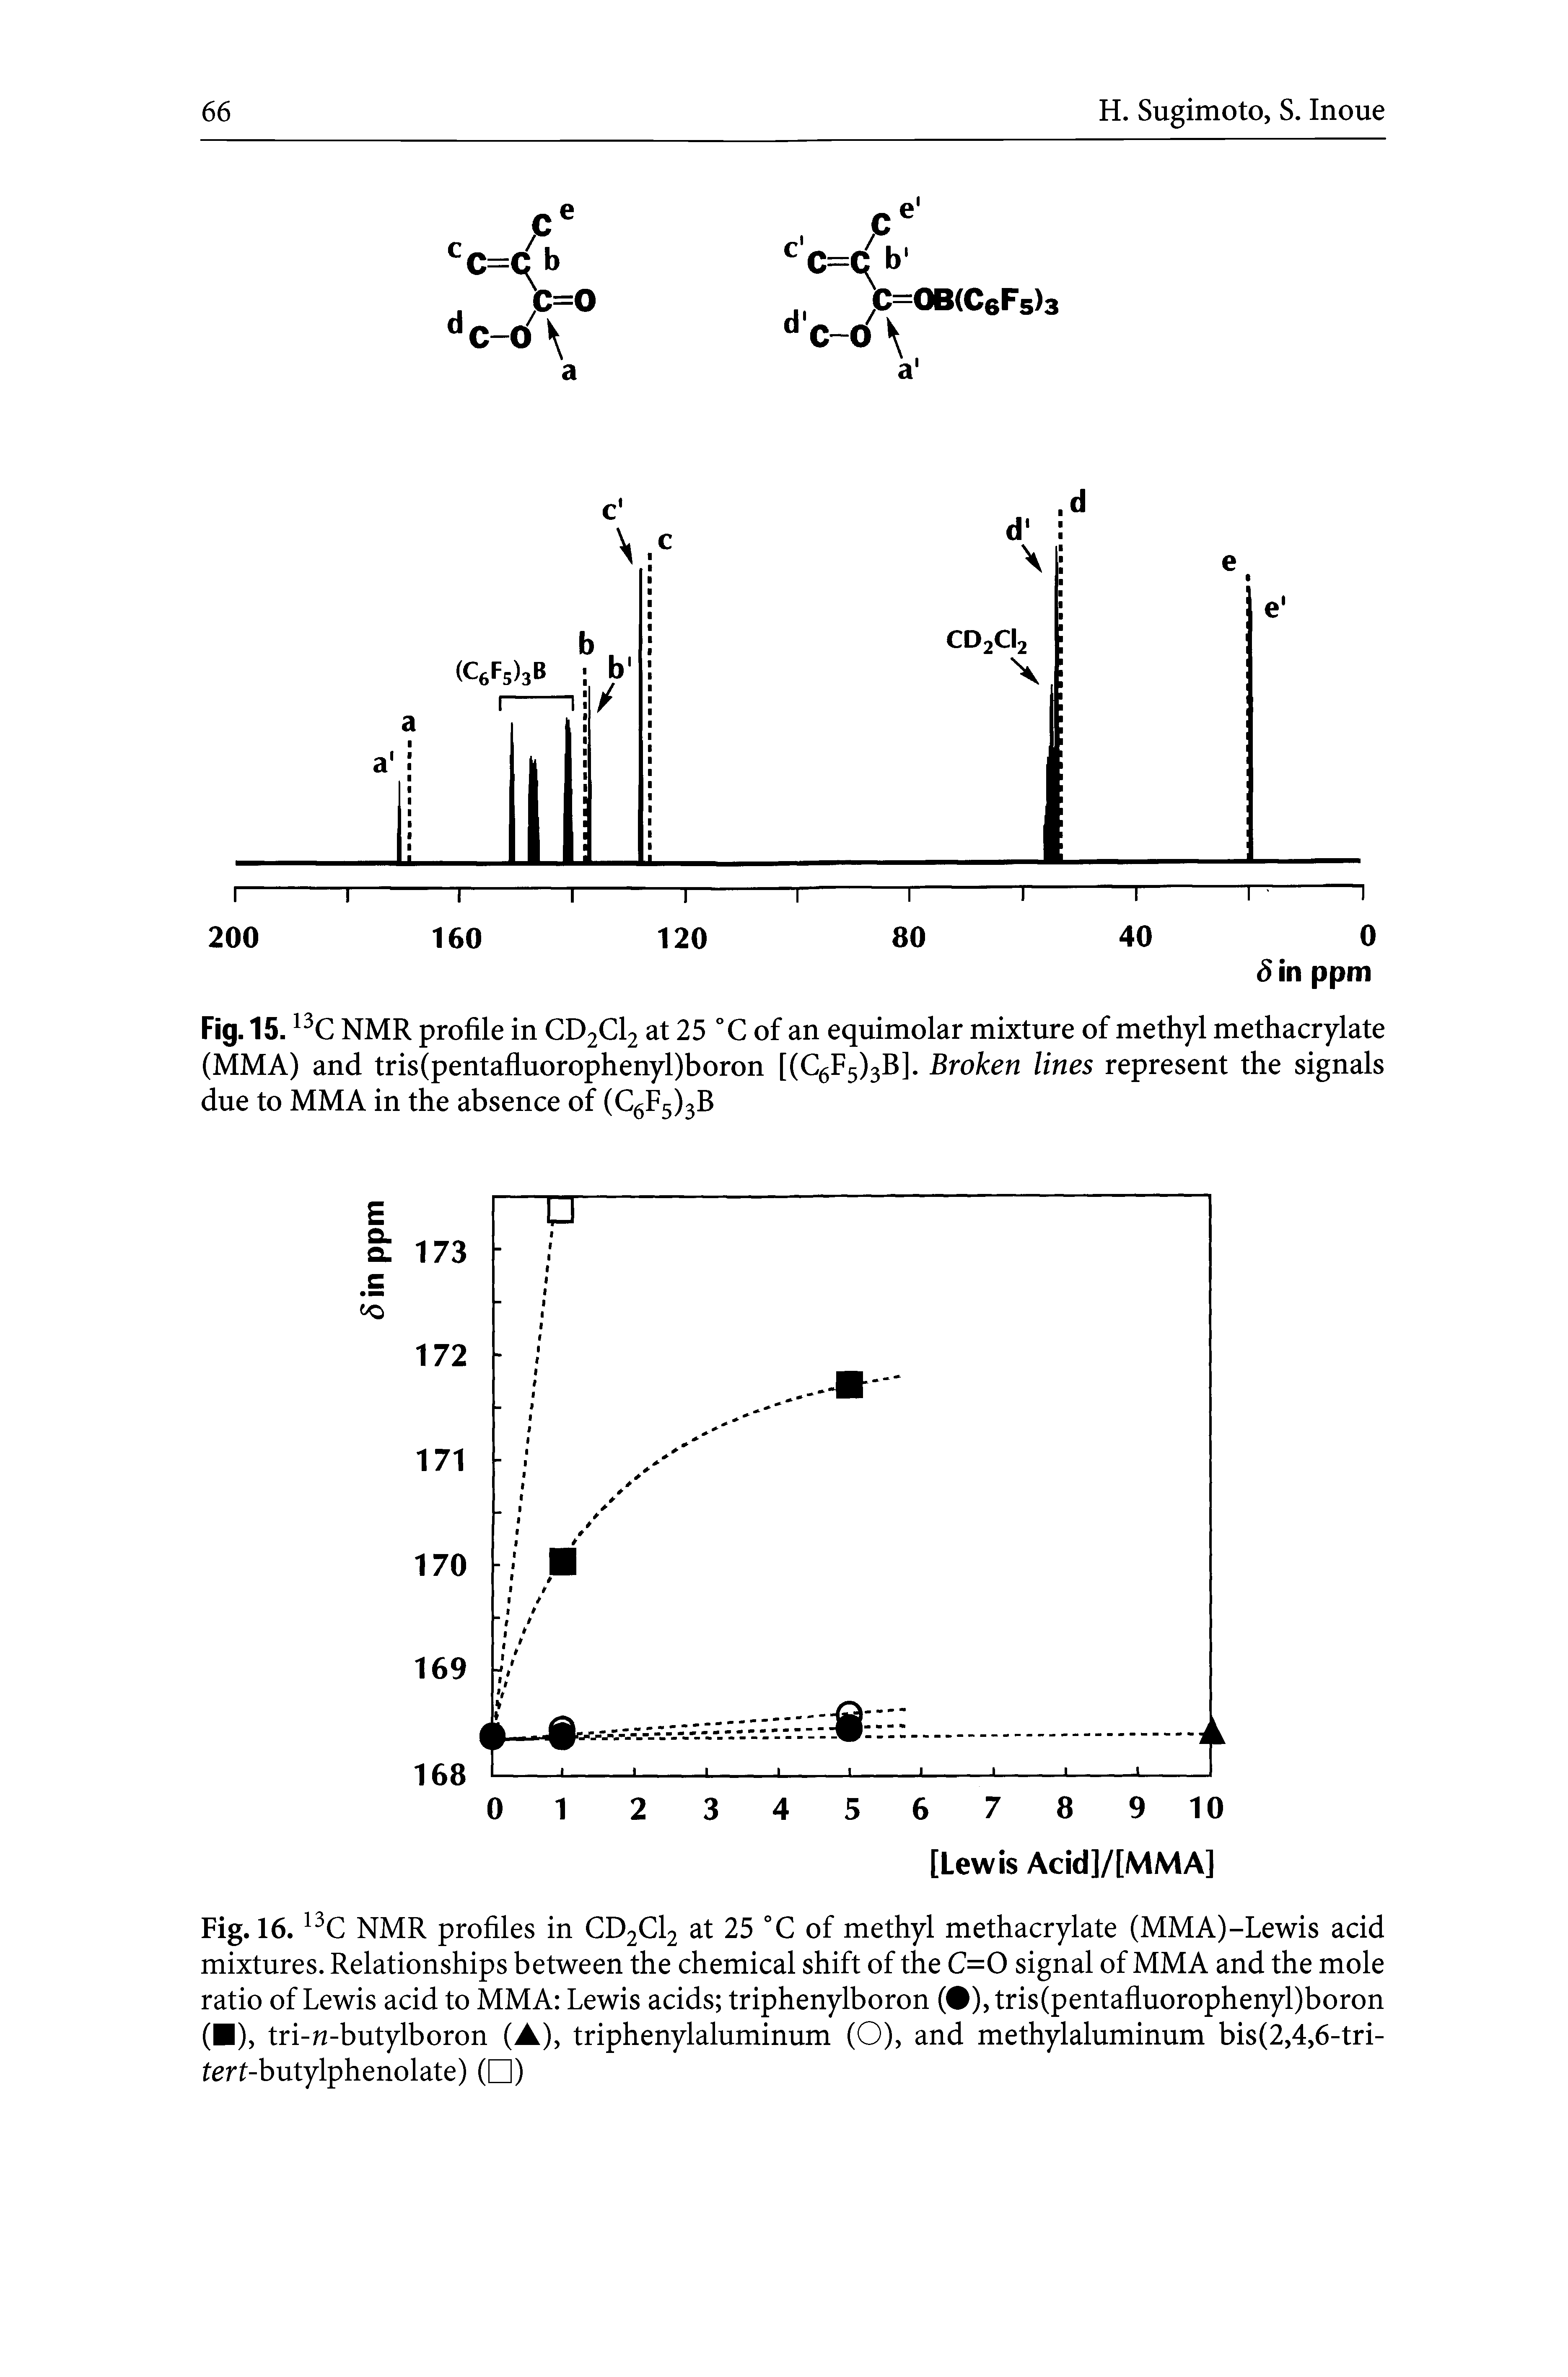 Fig. 16. NMR profiles in CD2CI2 at 25 °C of methyl methacrylate (MMA)-Lewis acid mixtures. Relationships between the chemical shift of the C=0 signal of MMA and the mole ratio of Lewis acid to MMA Lewis acids triphenylboron ( ), tris(pentafluorophenyl)boron ( ), tri-n-butylboron (A), triphenylaluminum (O), and methylaluminum bis(2,4,6-tri-tert-butylphenolate) ( )...